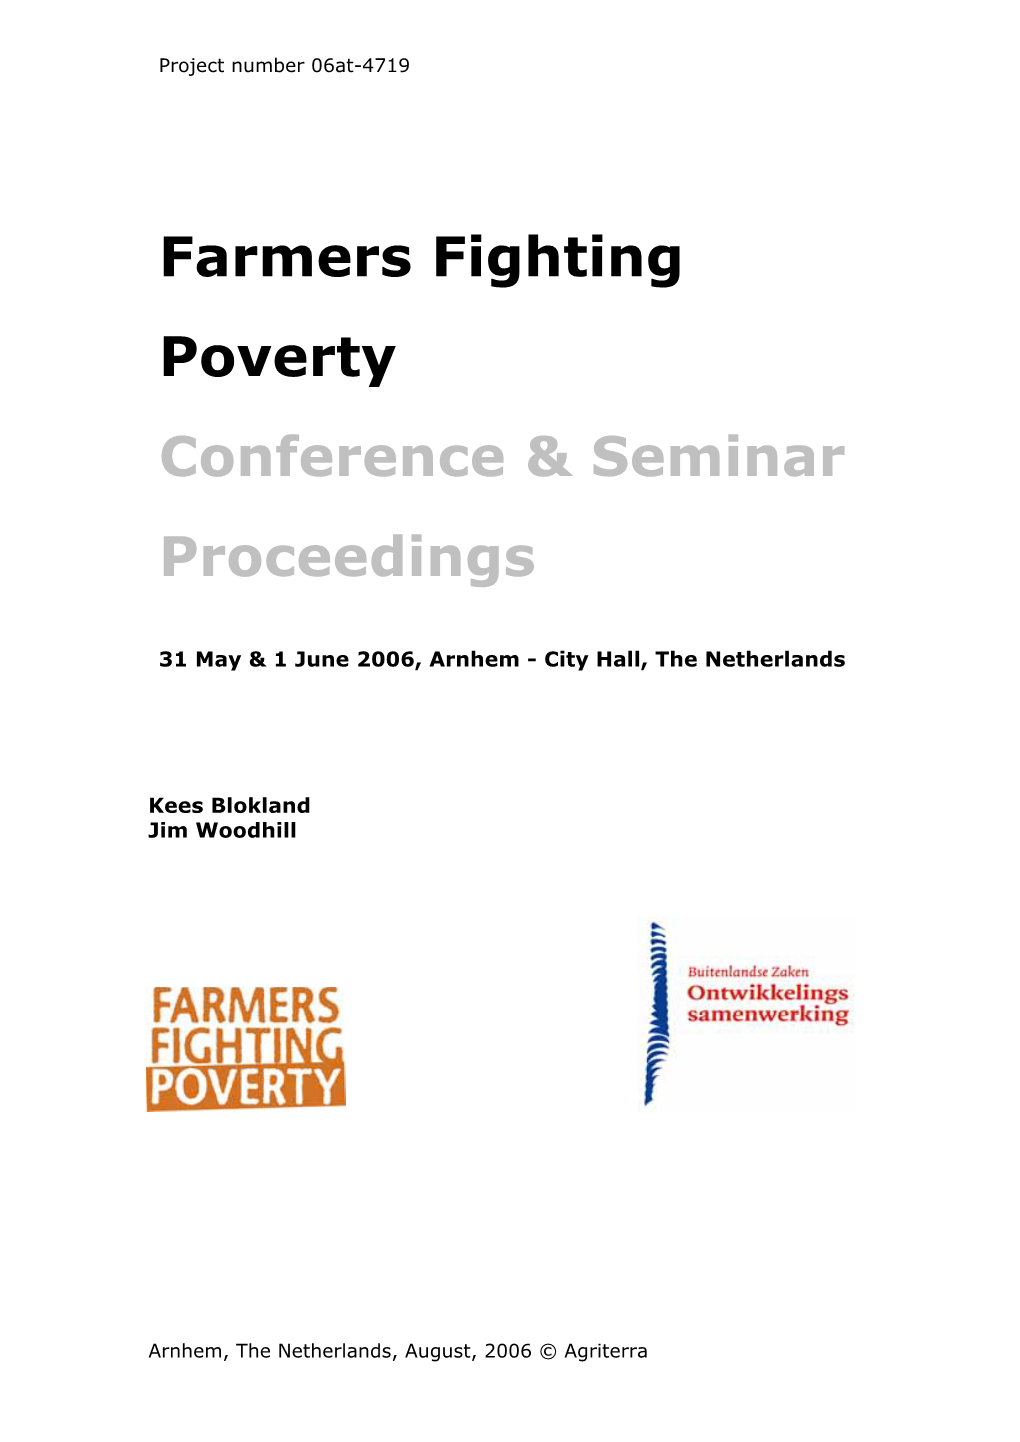 Farmers Fighting Poverty Conference & Seminar Proceedings